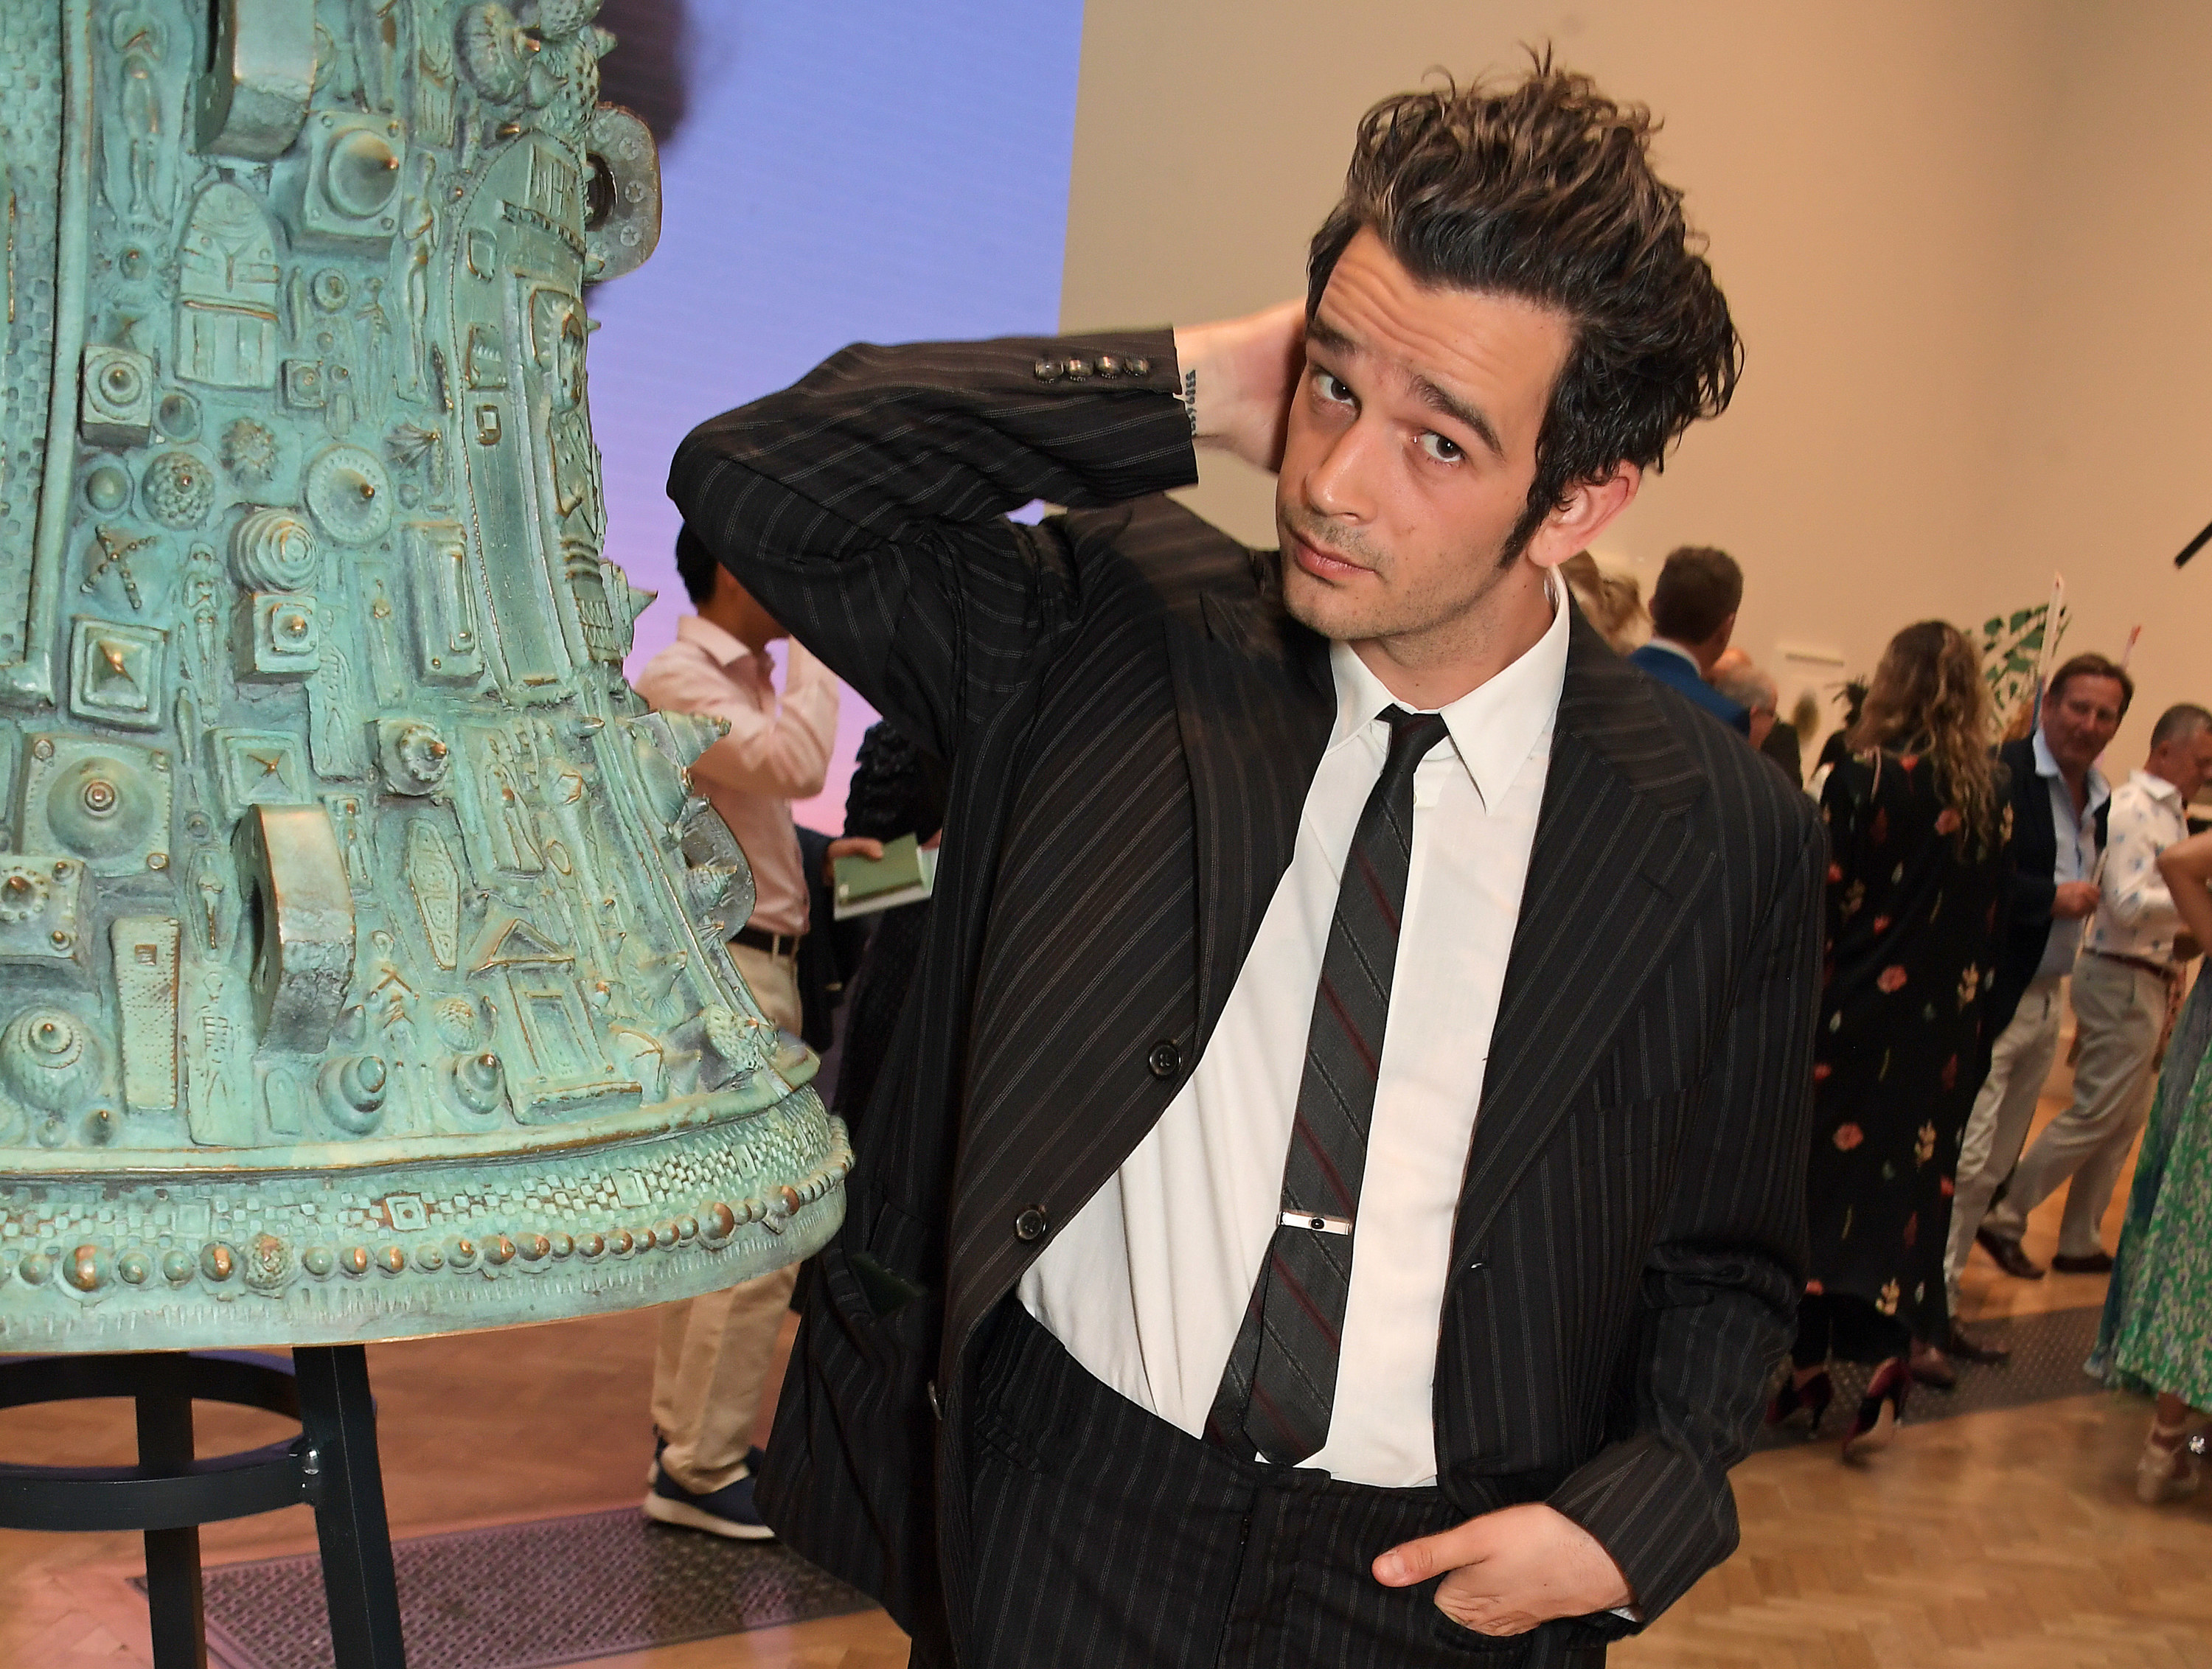 Matty in a suit and tie at an event